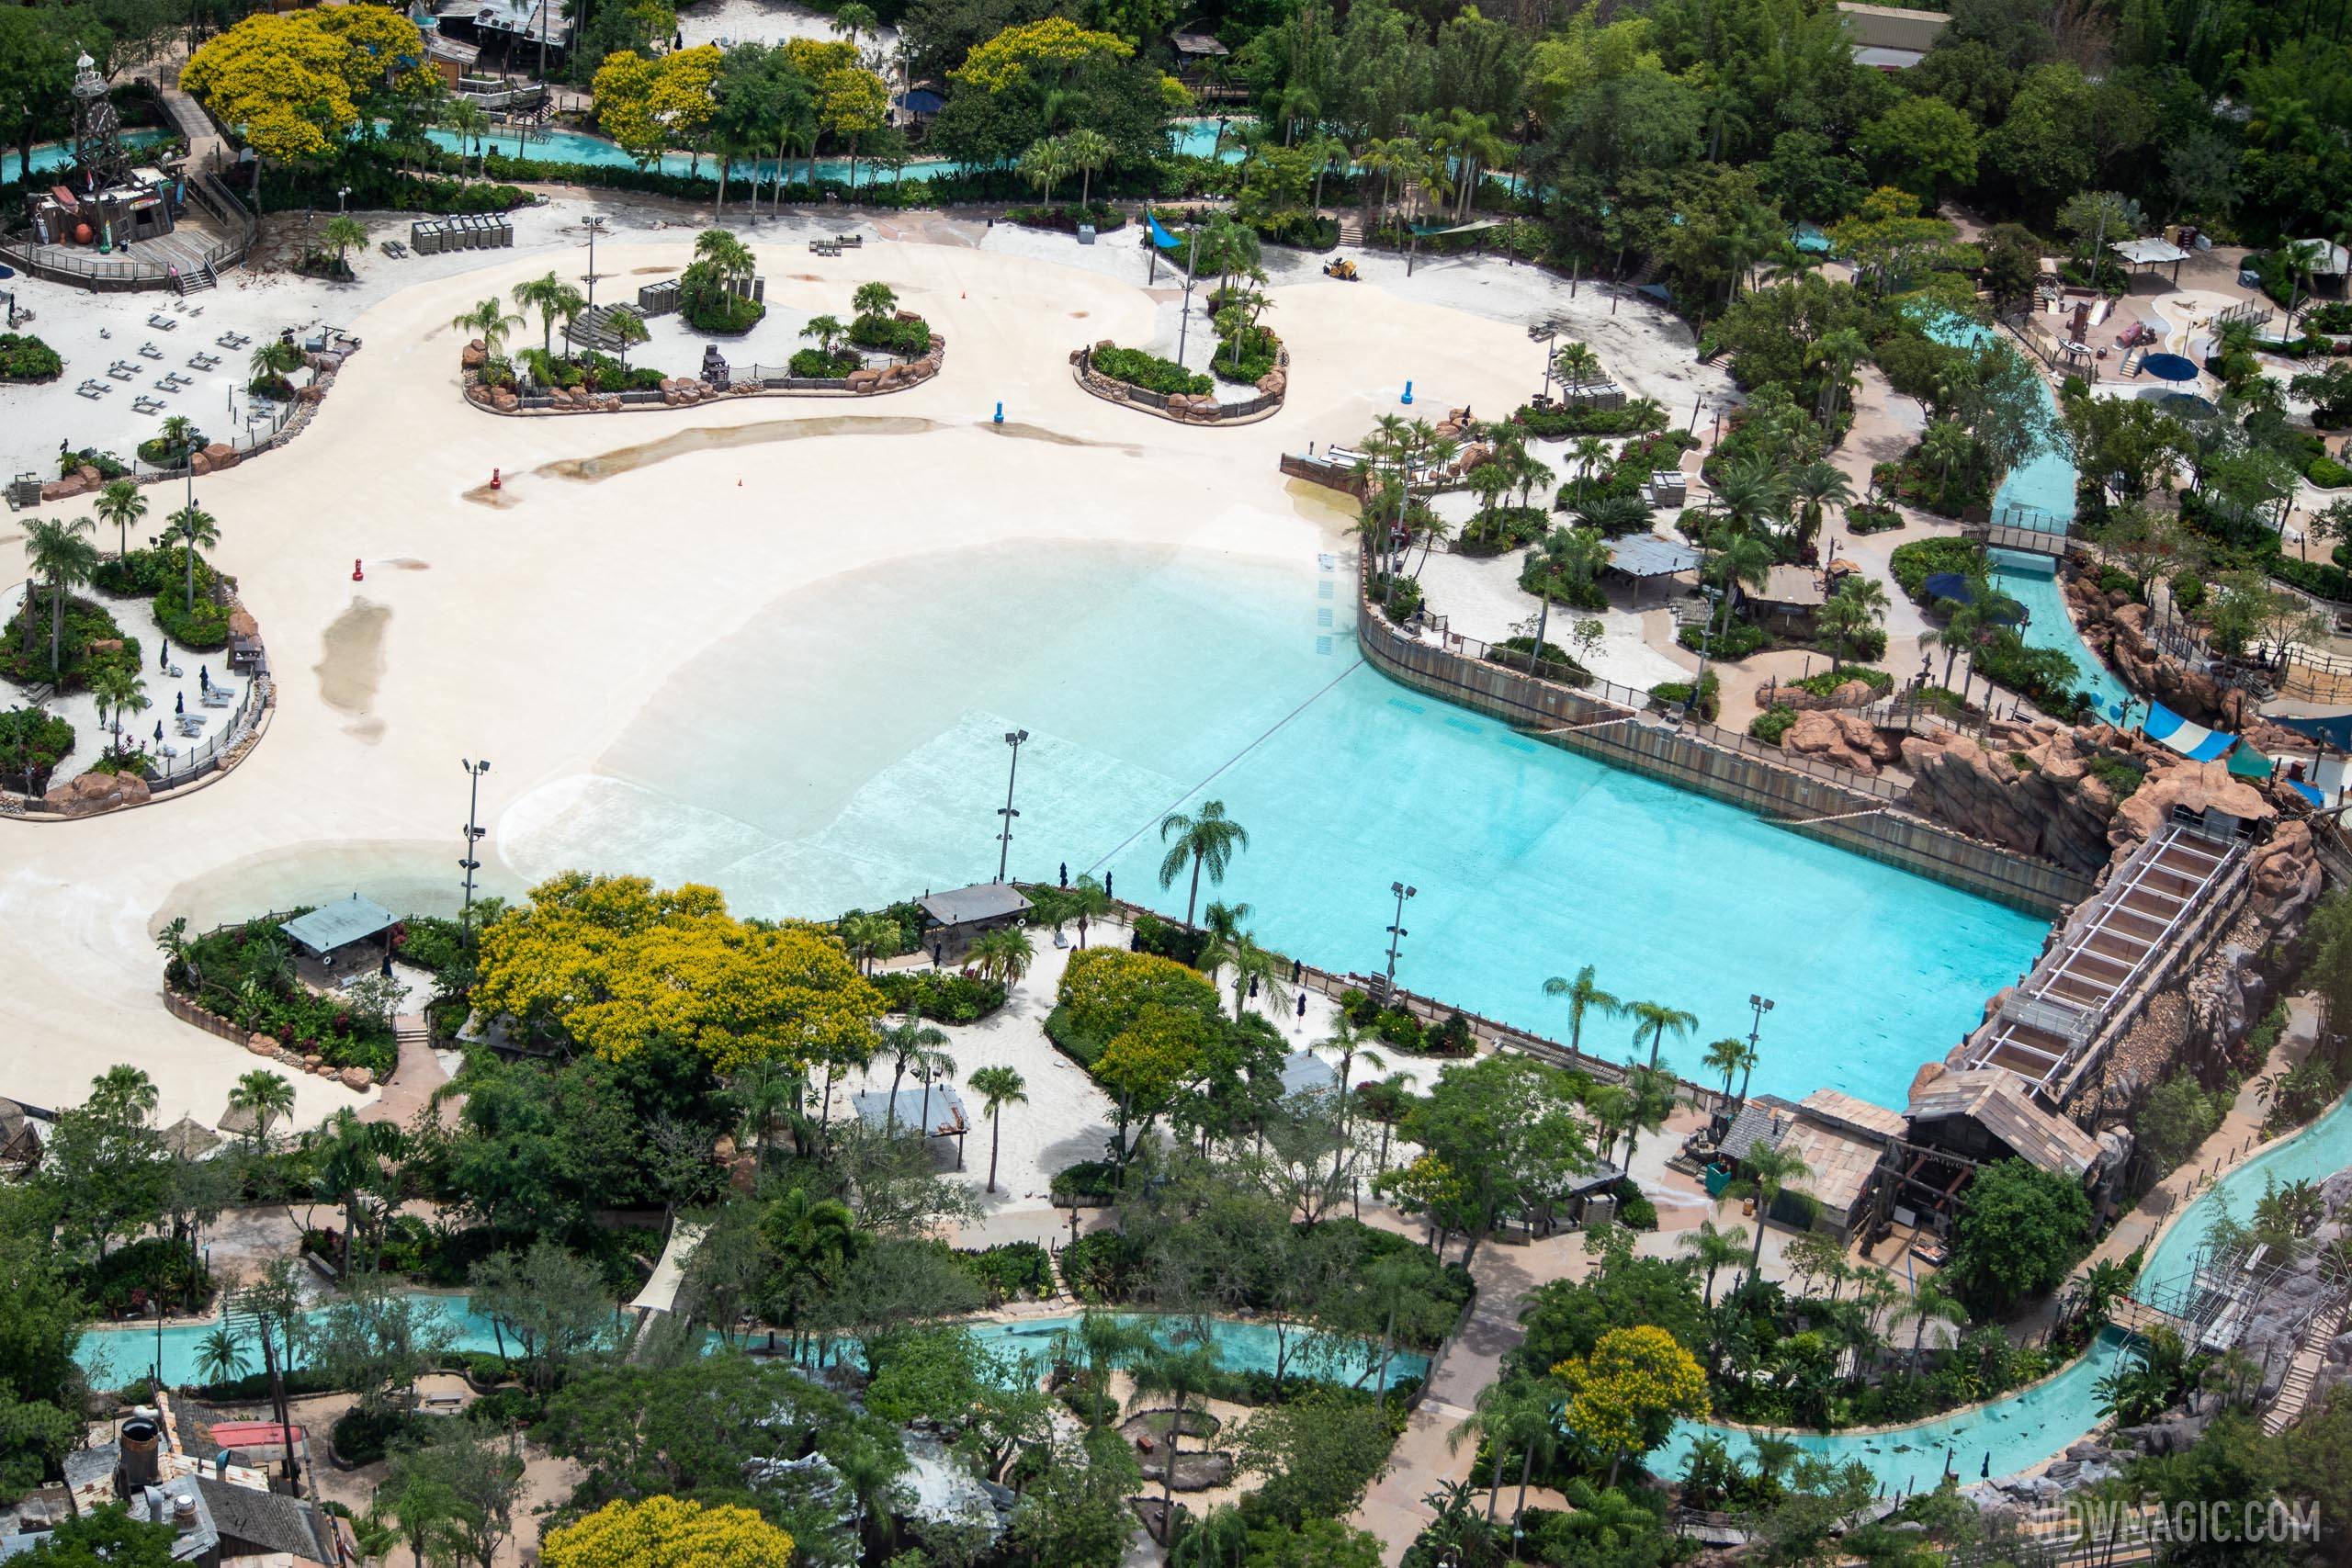 Aerial views of Blizzard Beach and Typhoon Lagoon during COVID-19 closure